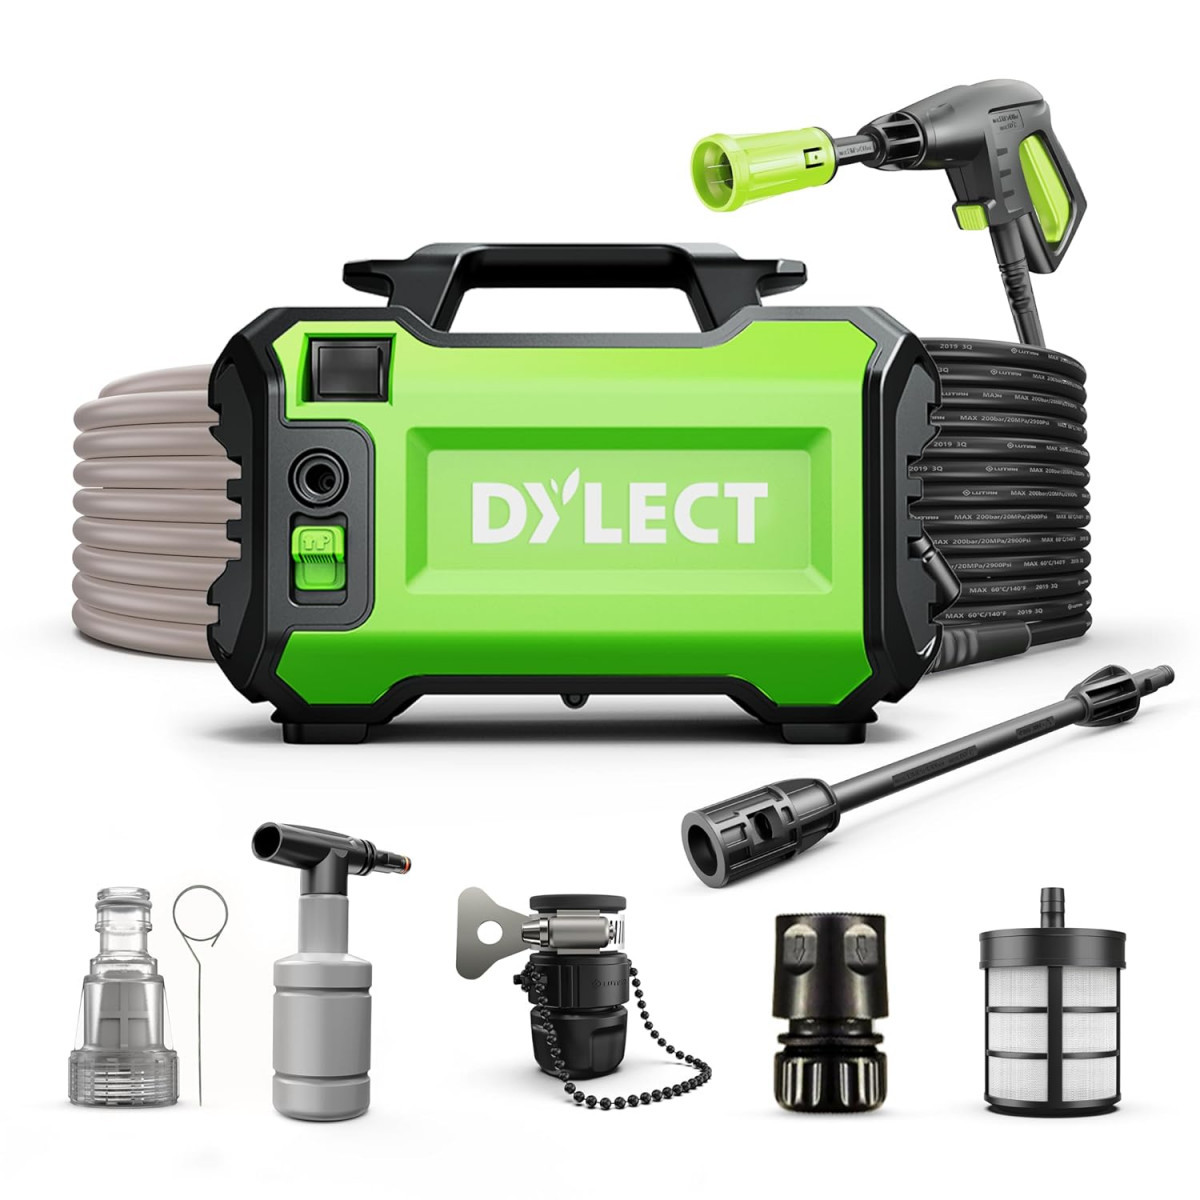 DYLECT Ultra Clean High Pressure Car Washer Pump 1400 Watts Motor 120 Bars Pressure 65LMin Flow Rate 5m Outlet Hose Portable for Bike and Home Cleaning Includes 11 Accessories